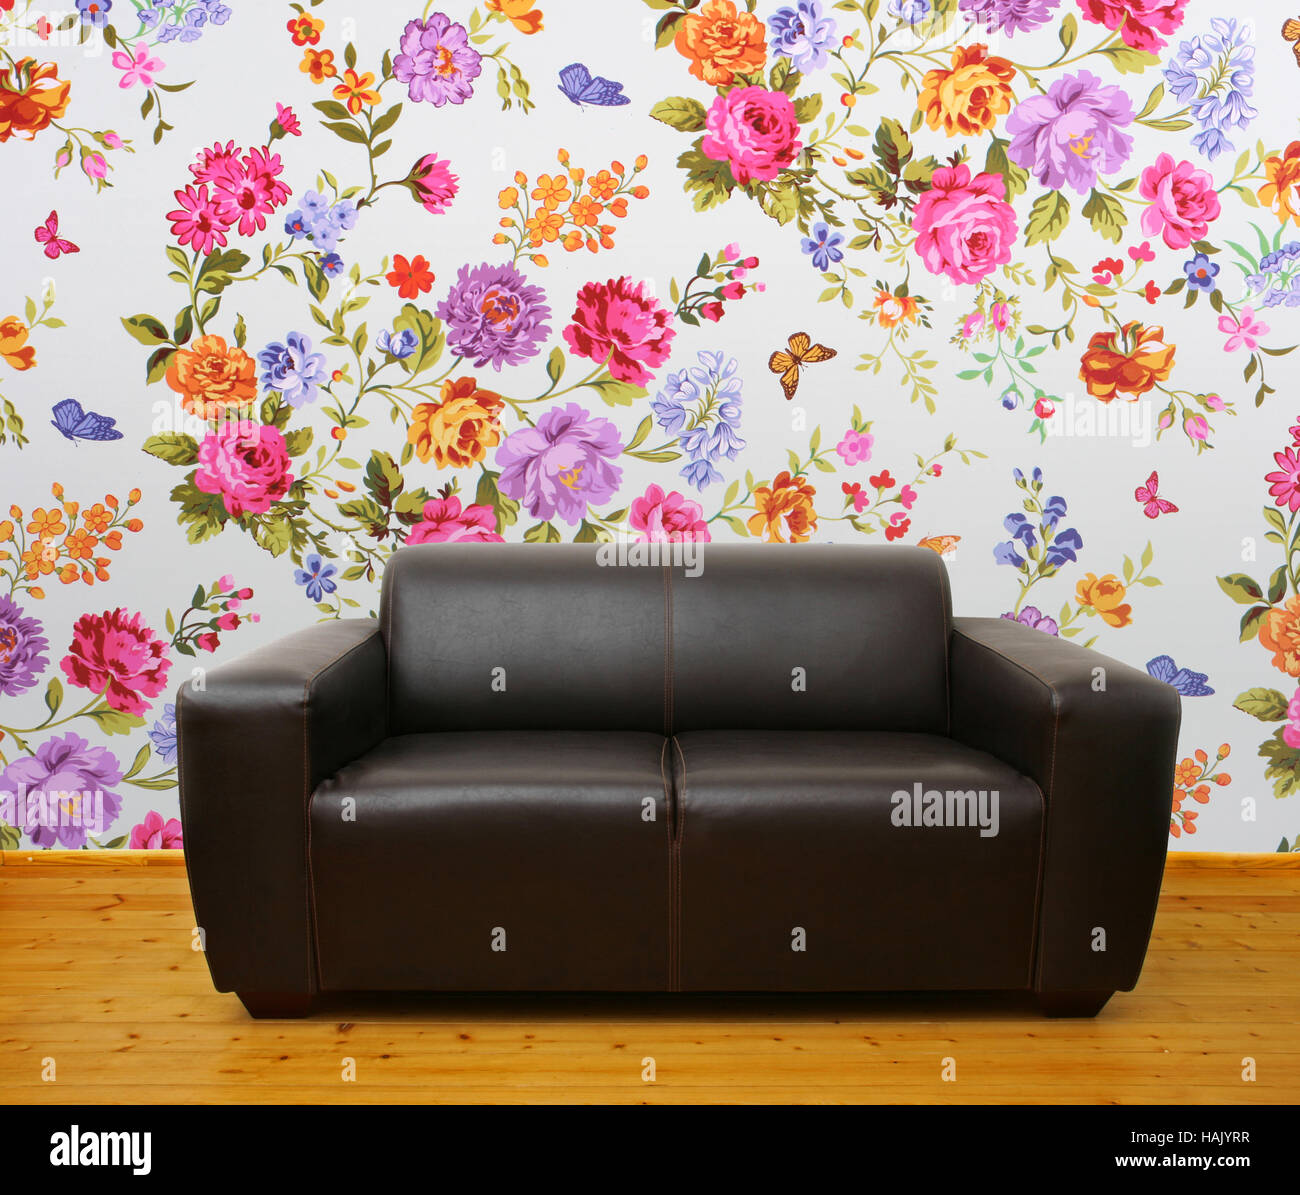 interior with brown leather couch against colorful floral wall Stock Photo